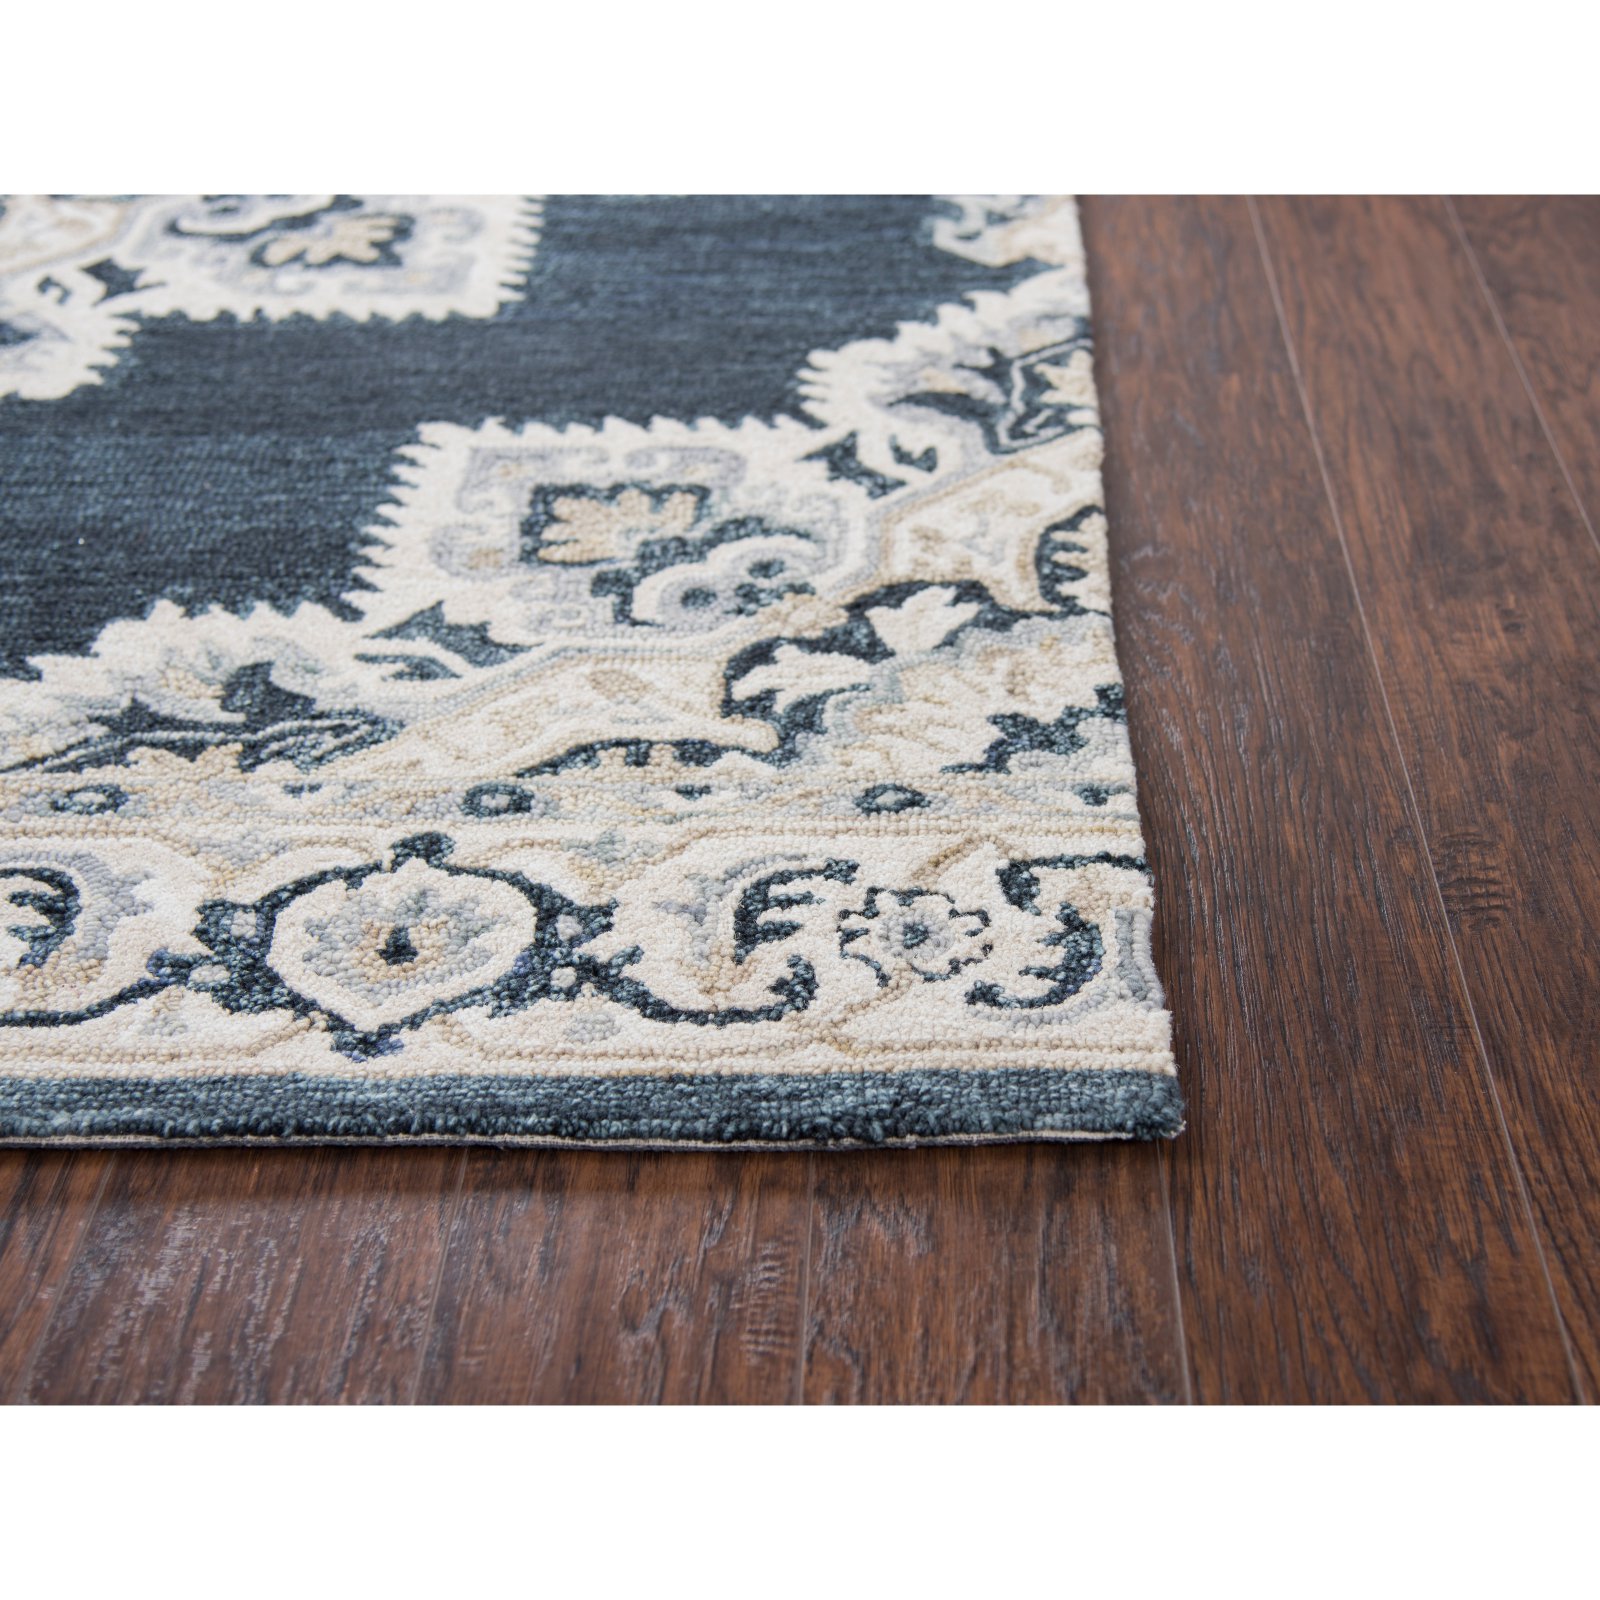 Rizzy Home RS070B Dark Blue 2'6" x 8' Hand-Tufted Area Rug - image 2 of 6